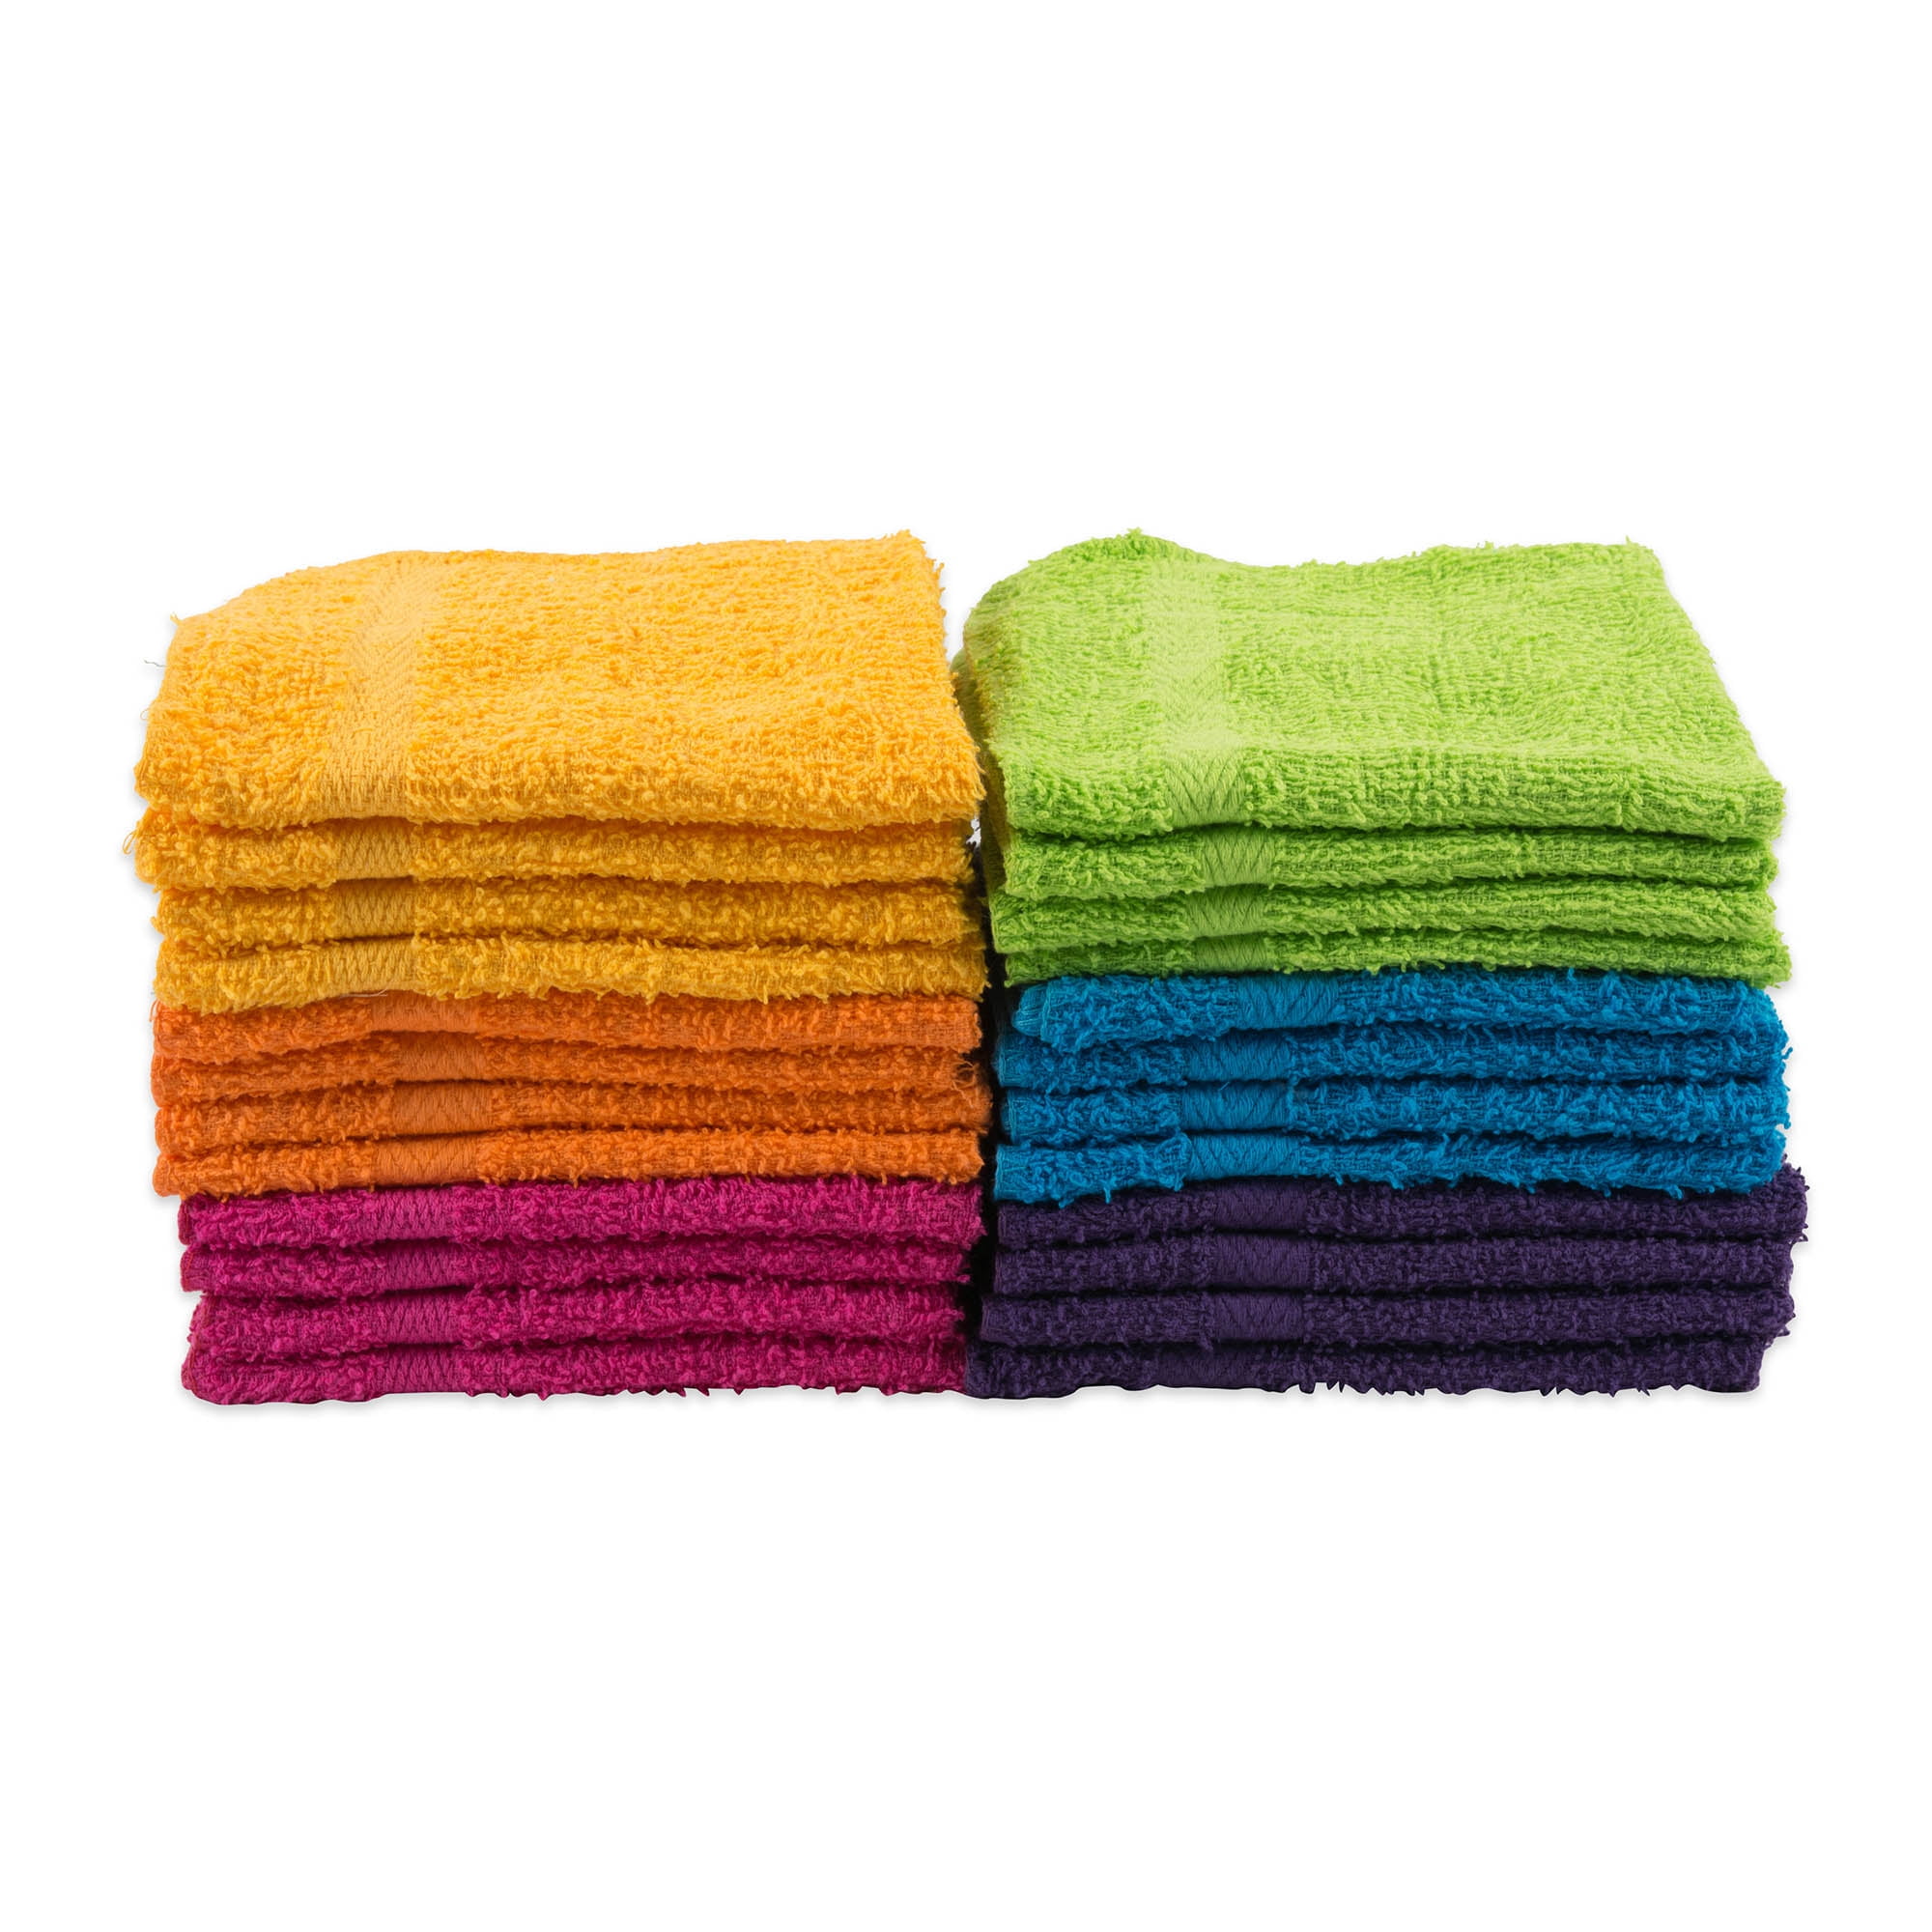 THE BIG ONE WASHCLOTHS FACE CLOTHS 6 PACK Pick Your Color 